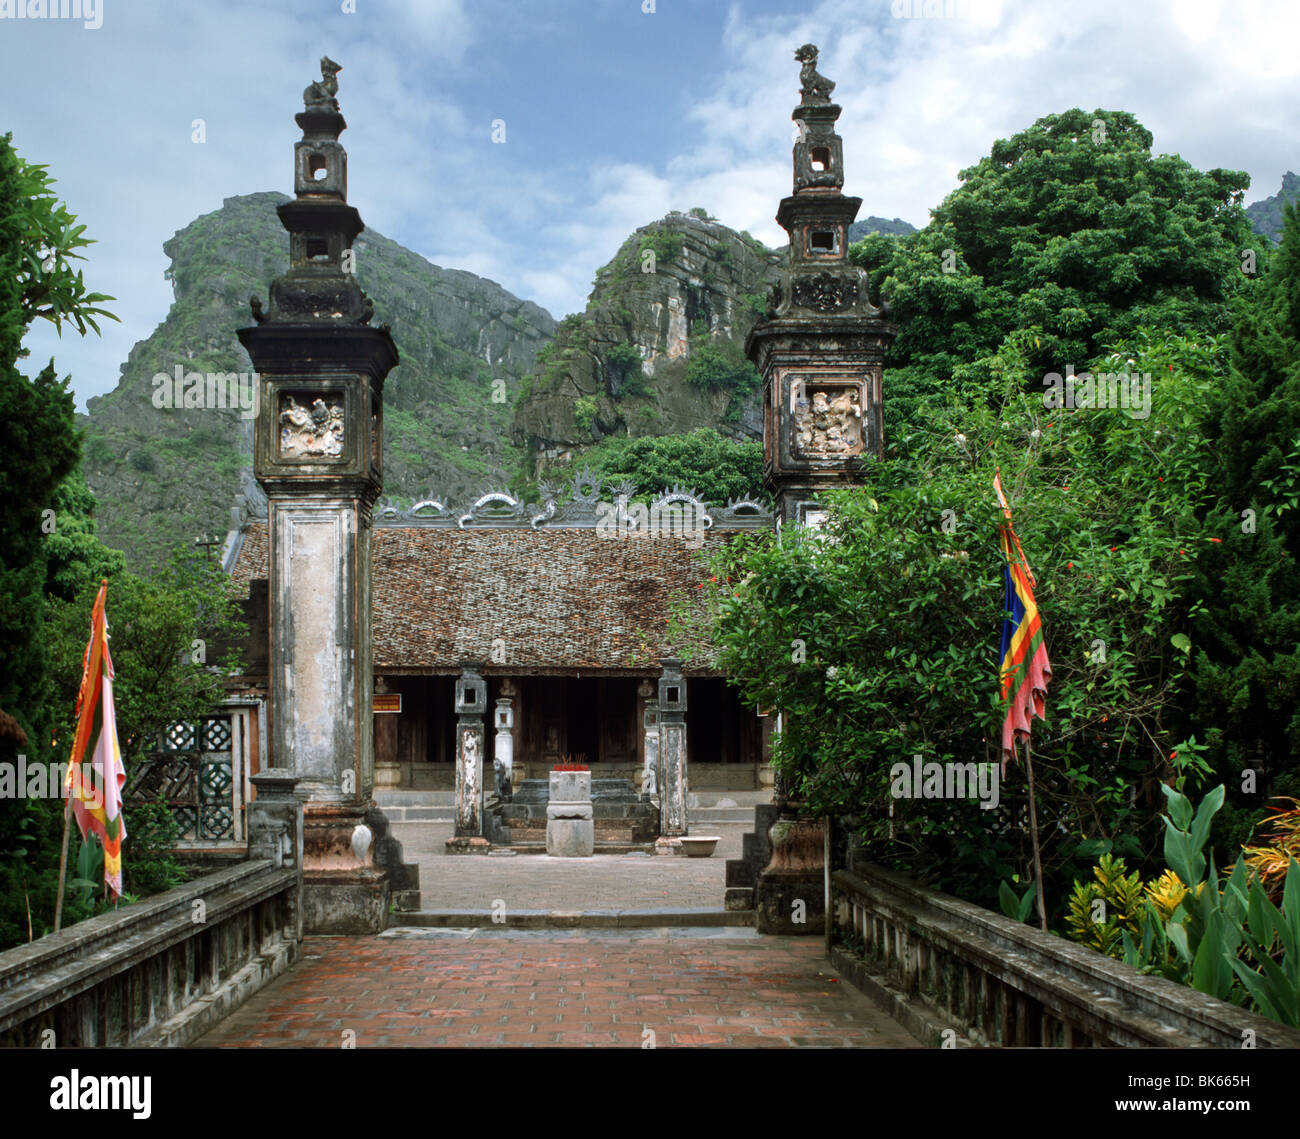 Dinh Temple, the oldest dynastic temple, rebuilt in 1600, Hoa Lu, Vietnam, Indochina, Southeast Asia, Asia Stock Photo